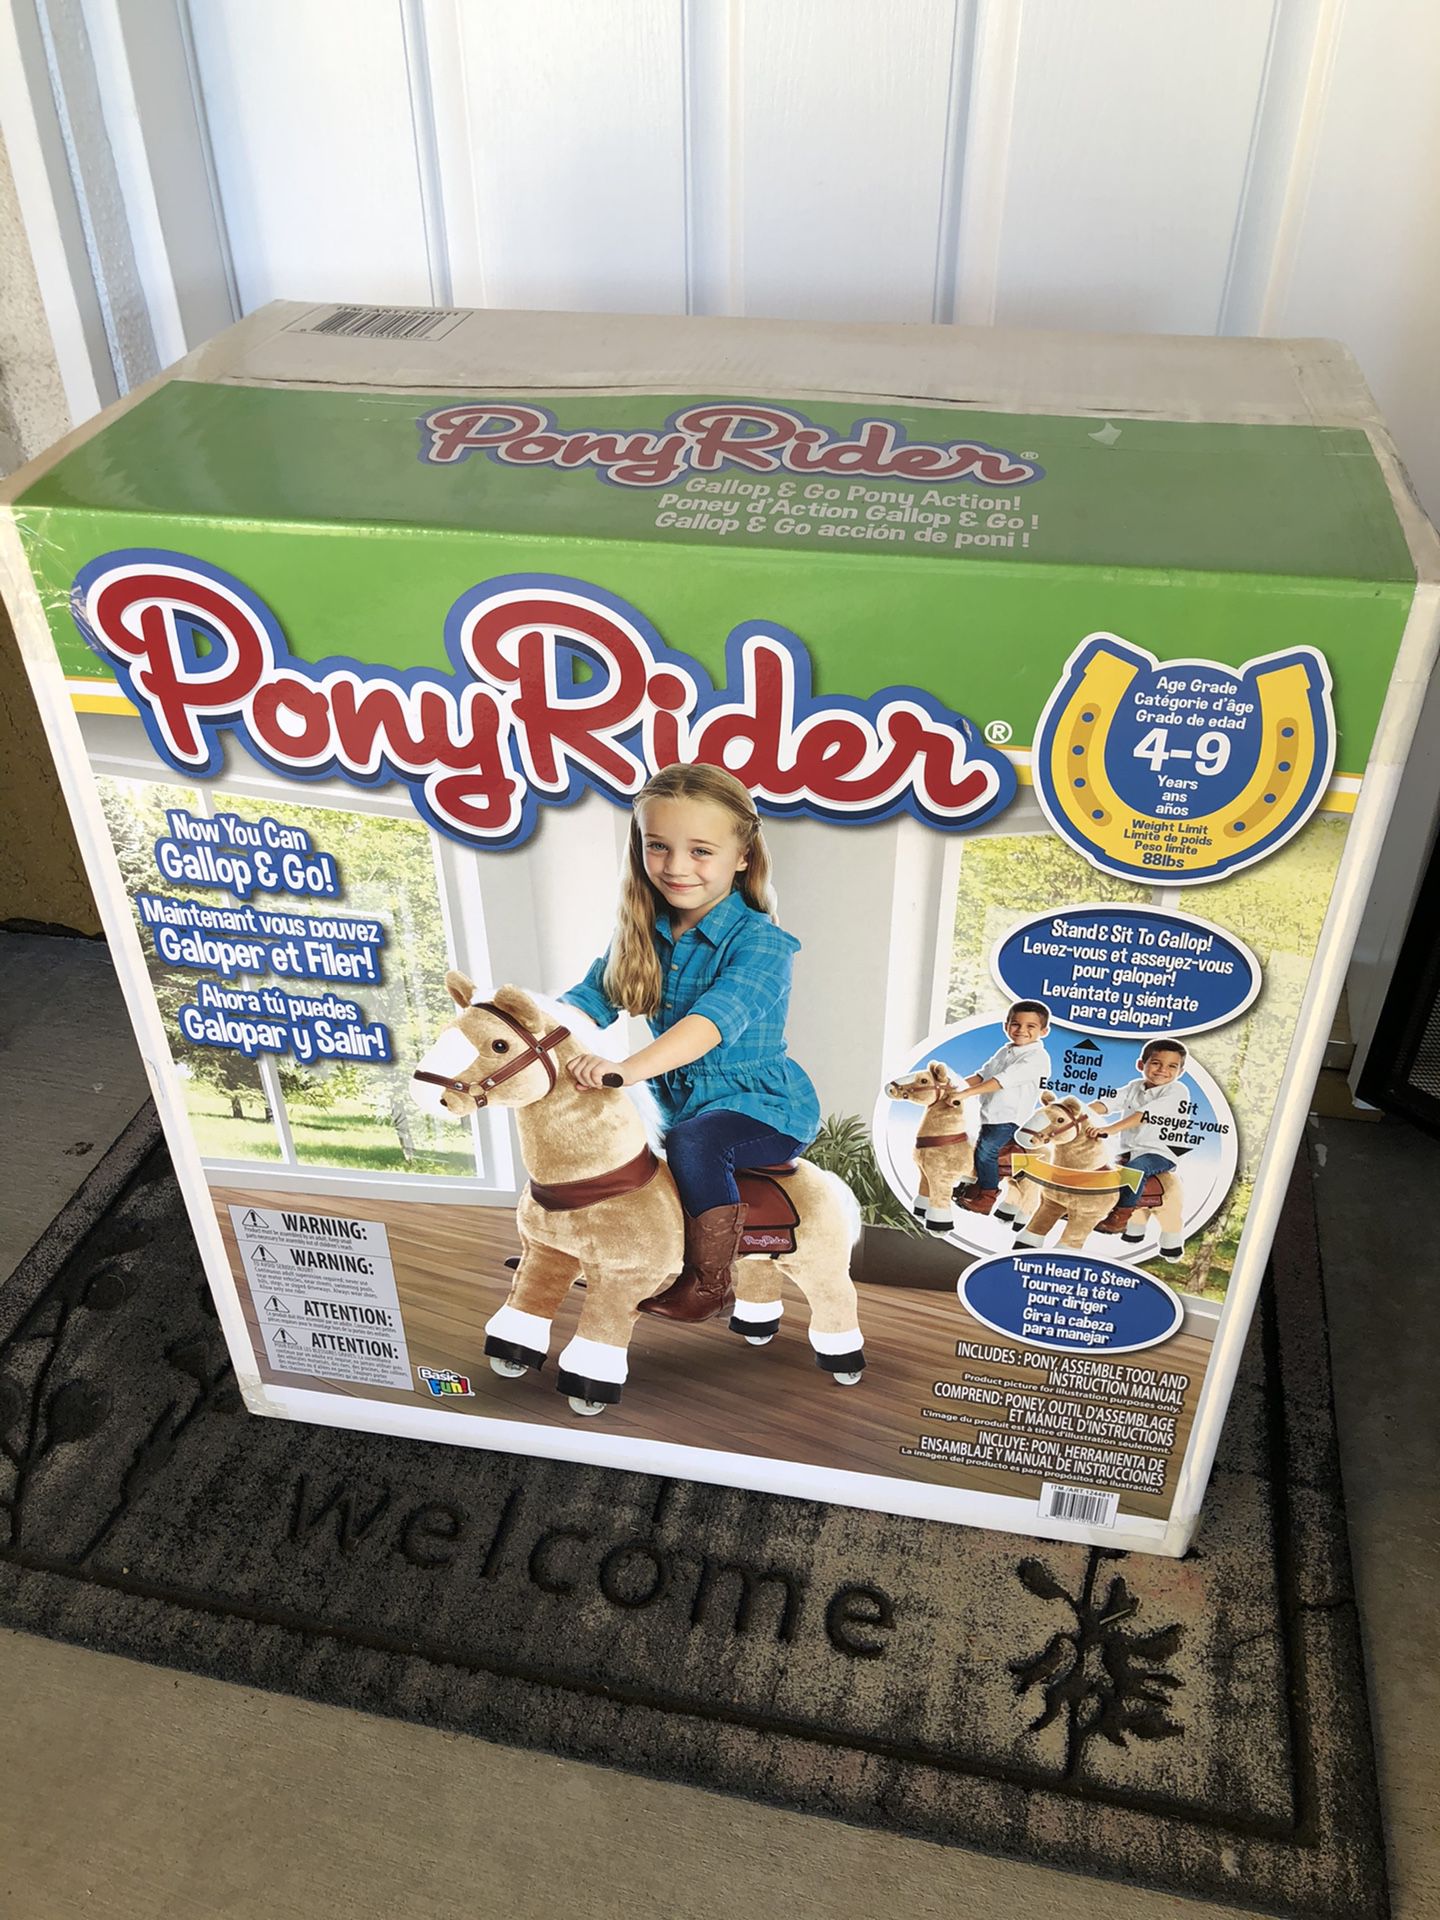 NEW PonyRider Plush Ride-On Toy Pony with Gallop and Go Action, Light Brown